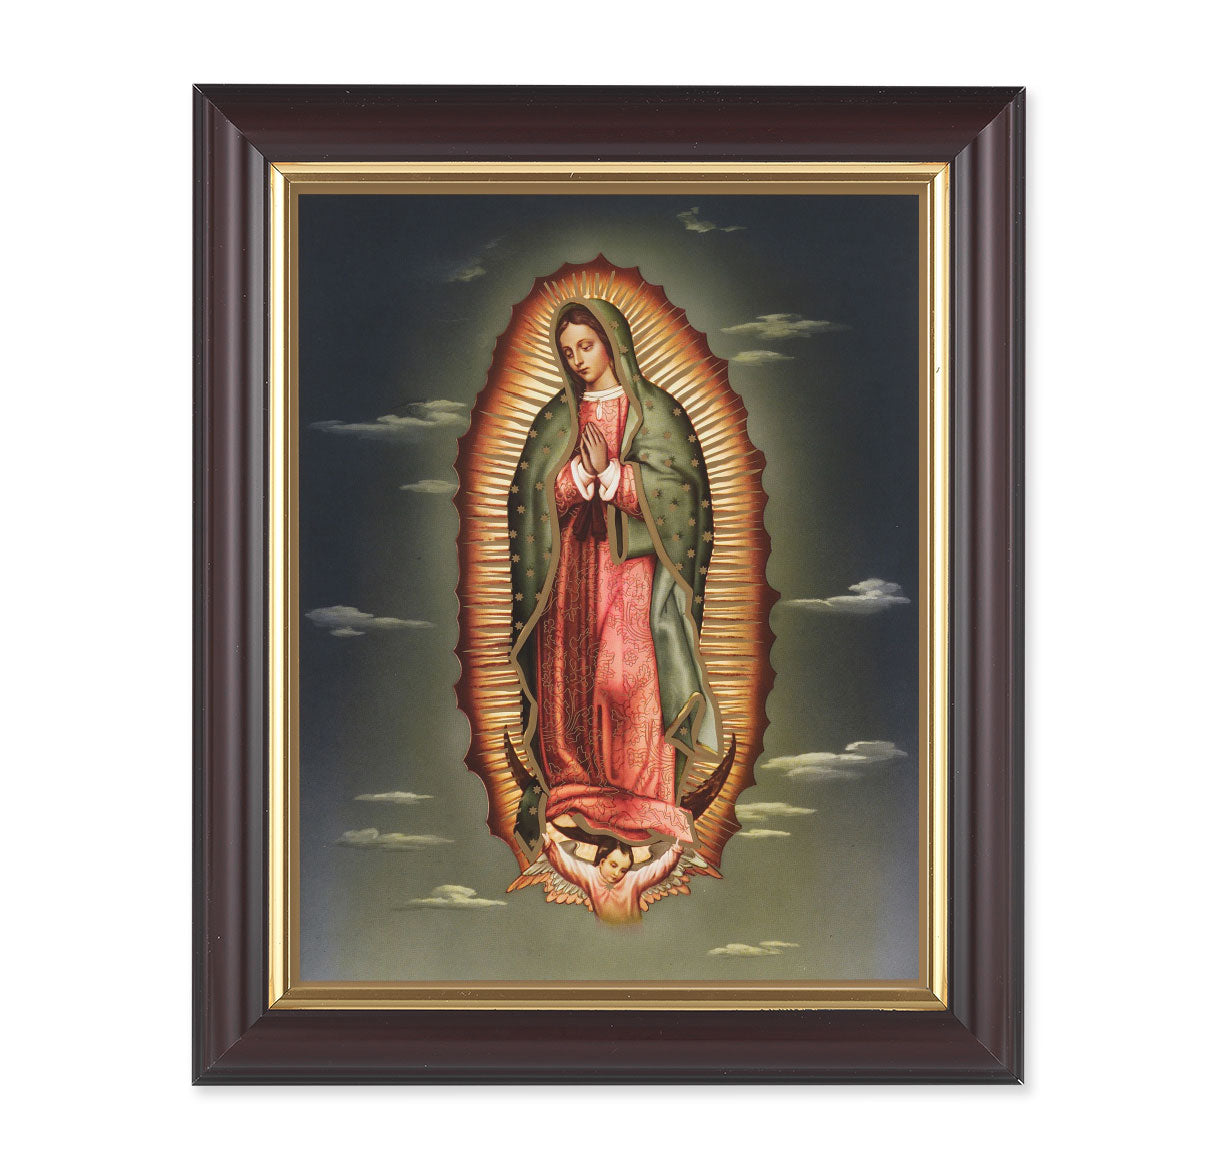 Our Lady of Guadalupe Walnut Framed Art